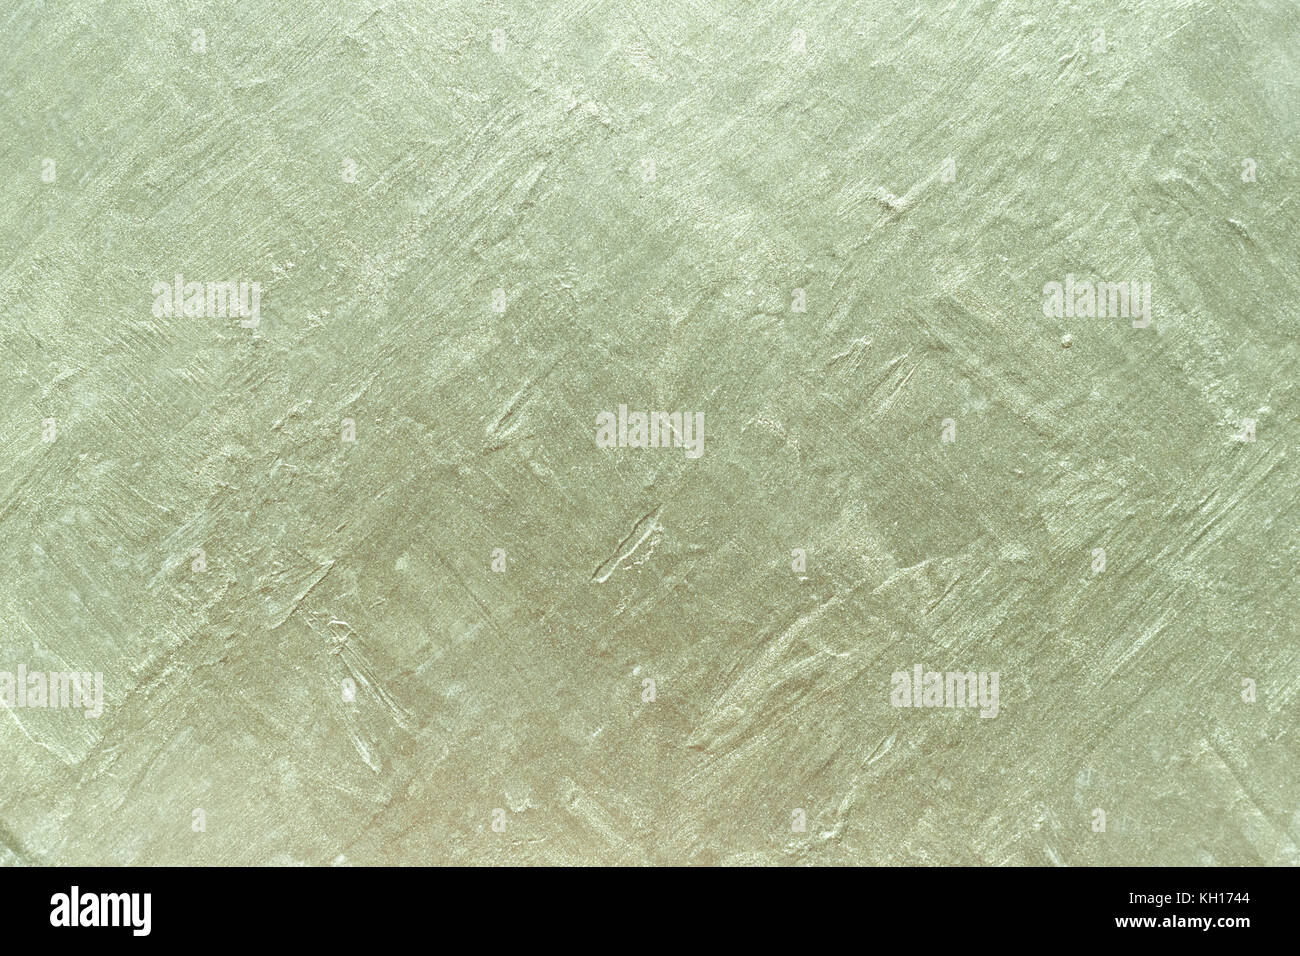 Green textures background close up Stock Photo